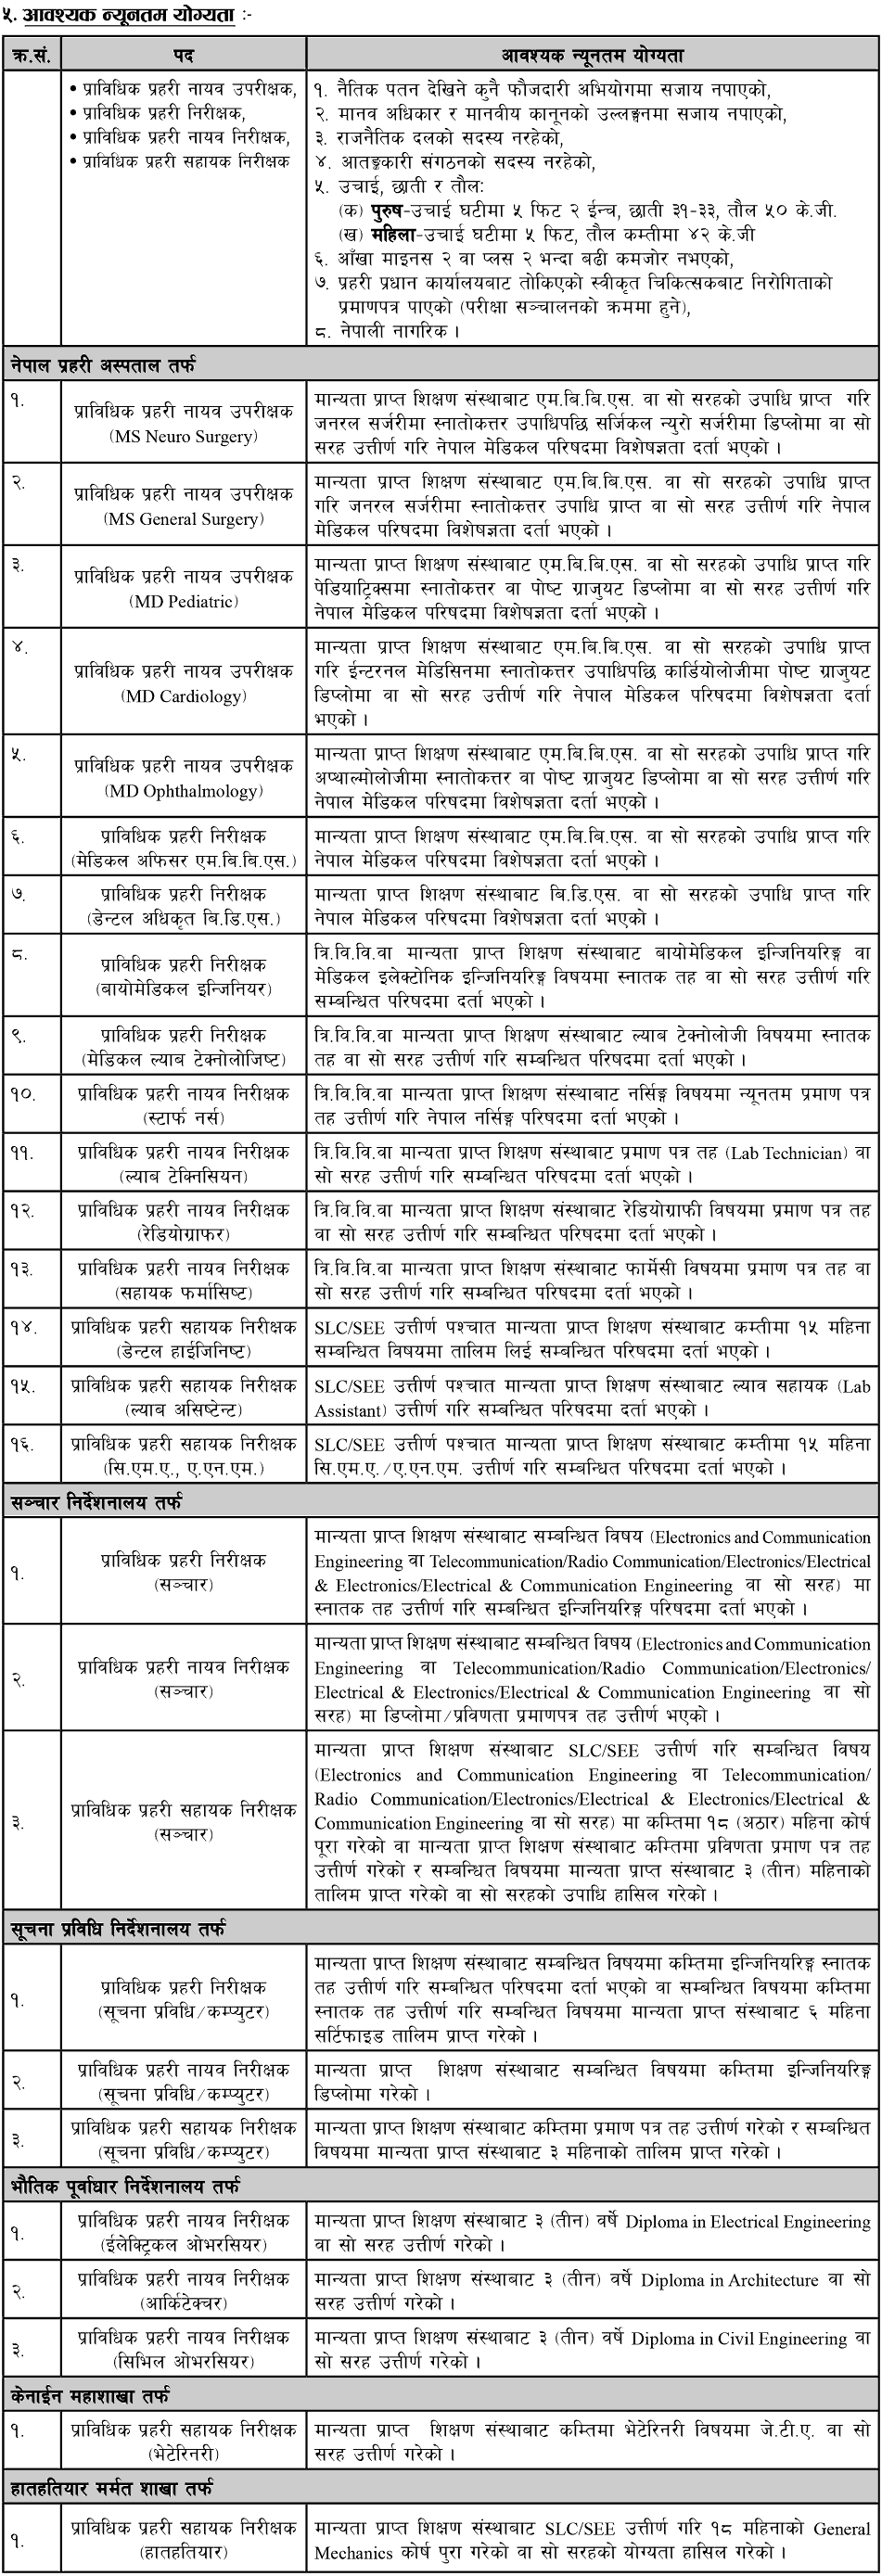 Vacancy Announcement Assistant Pharmacist and Staff Nurse Nepal Police Hospital